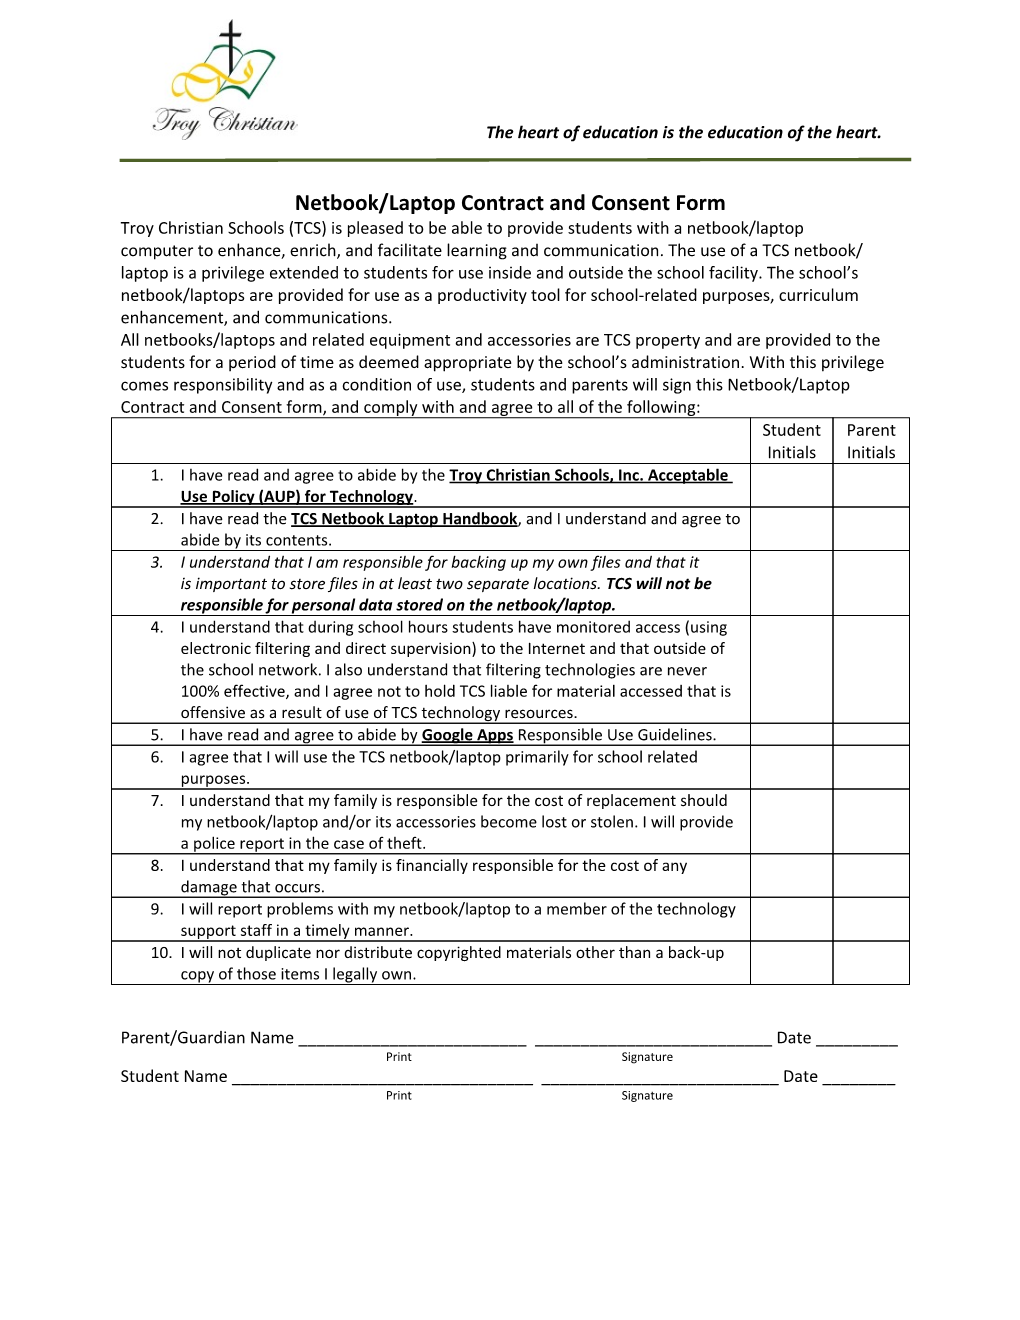 Netbook/Laptop Contract and Consent Form